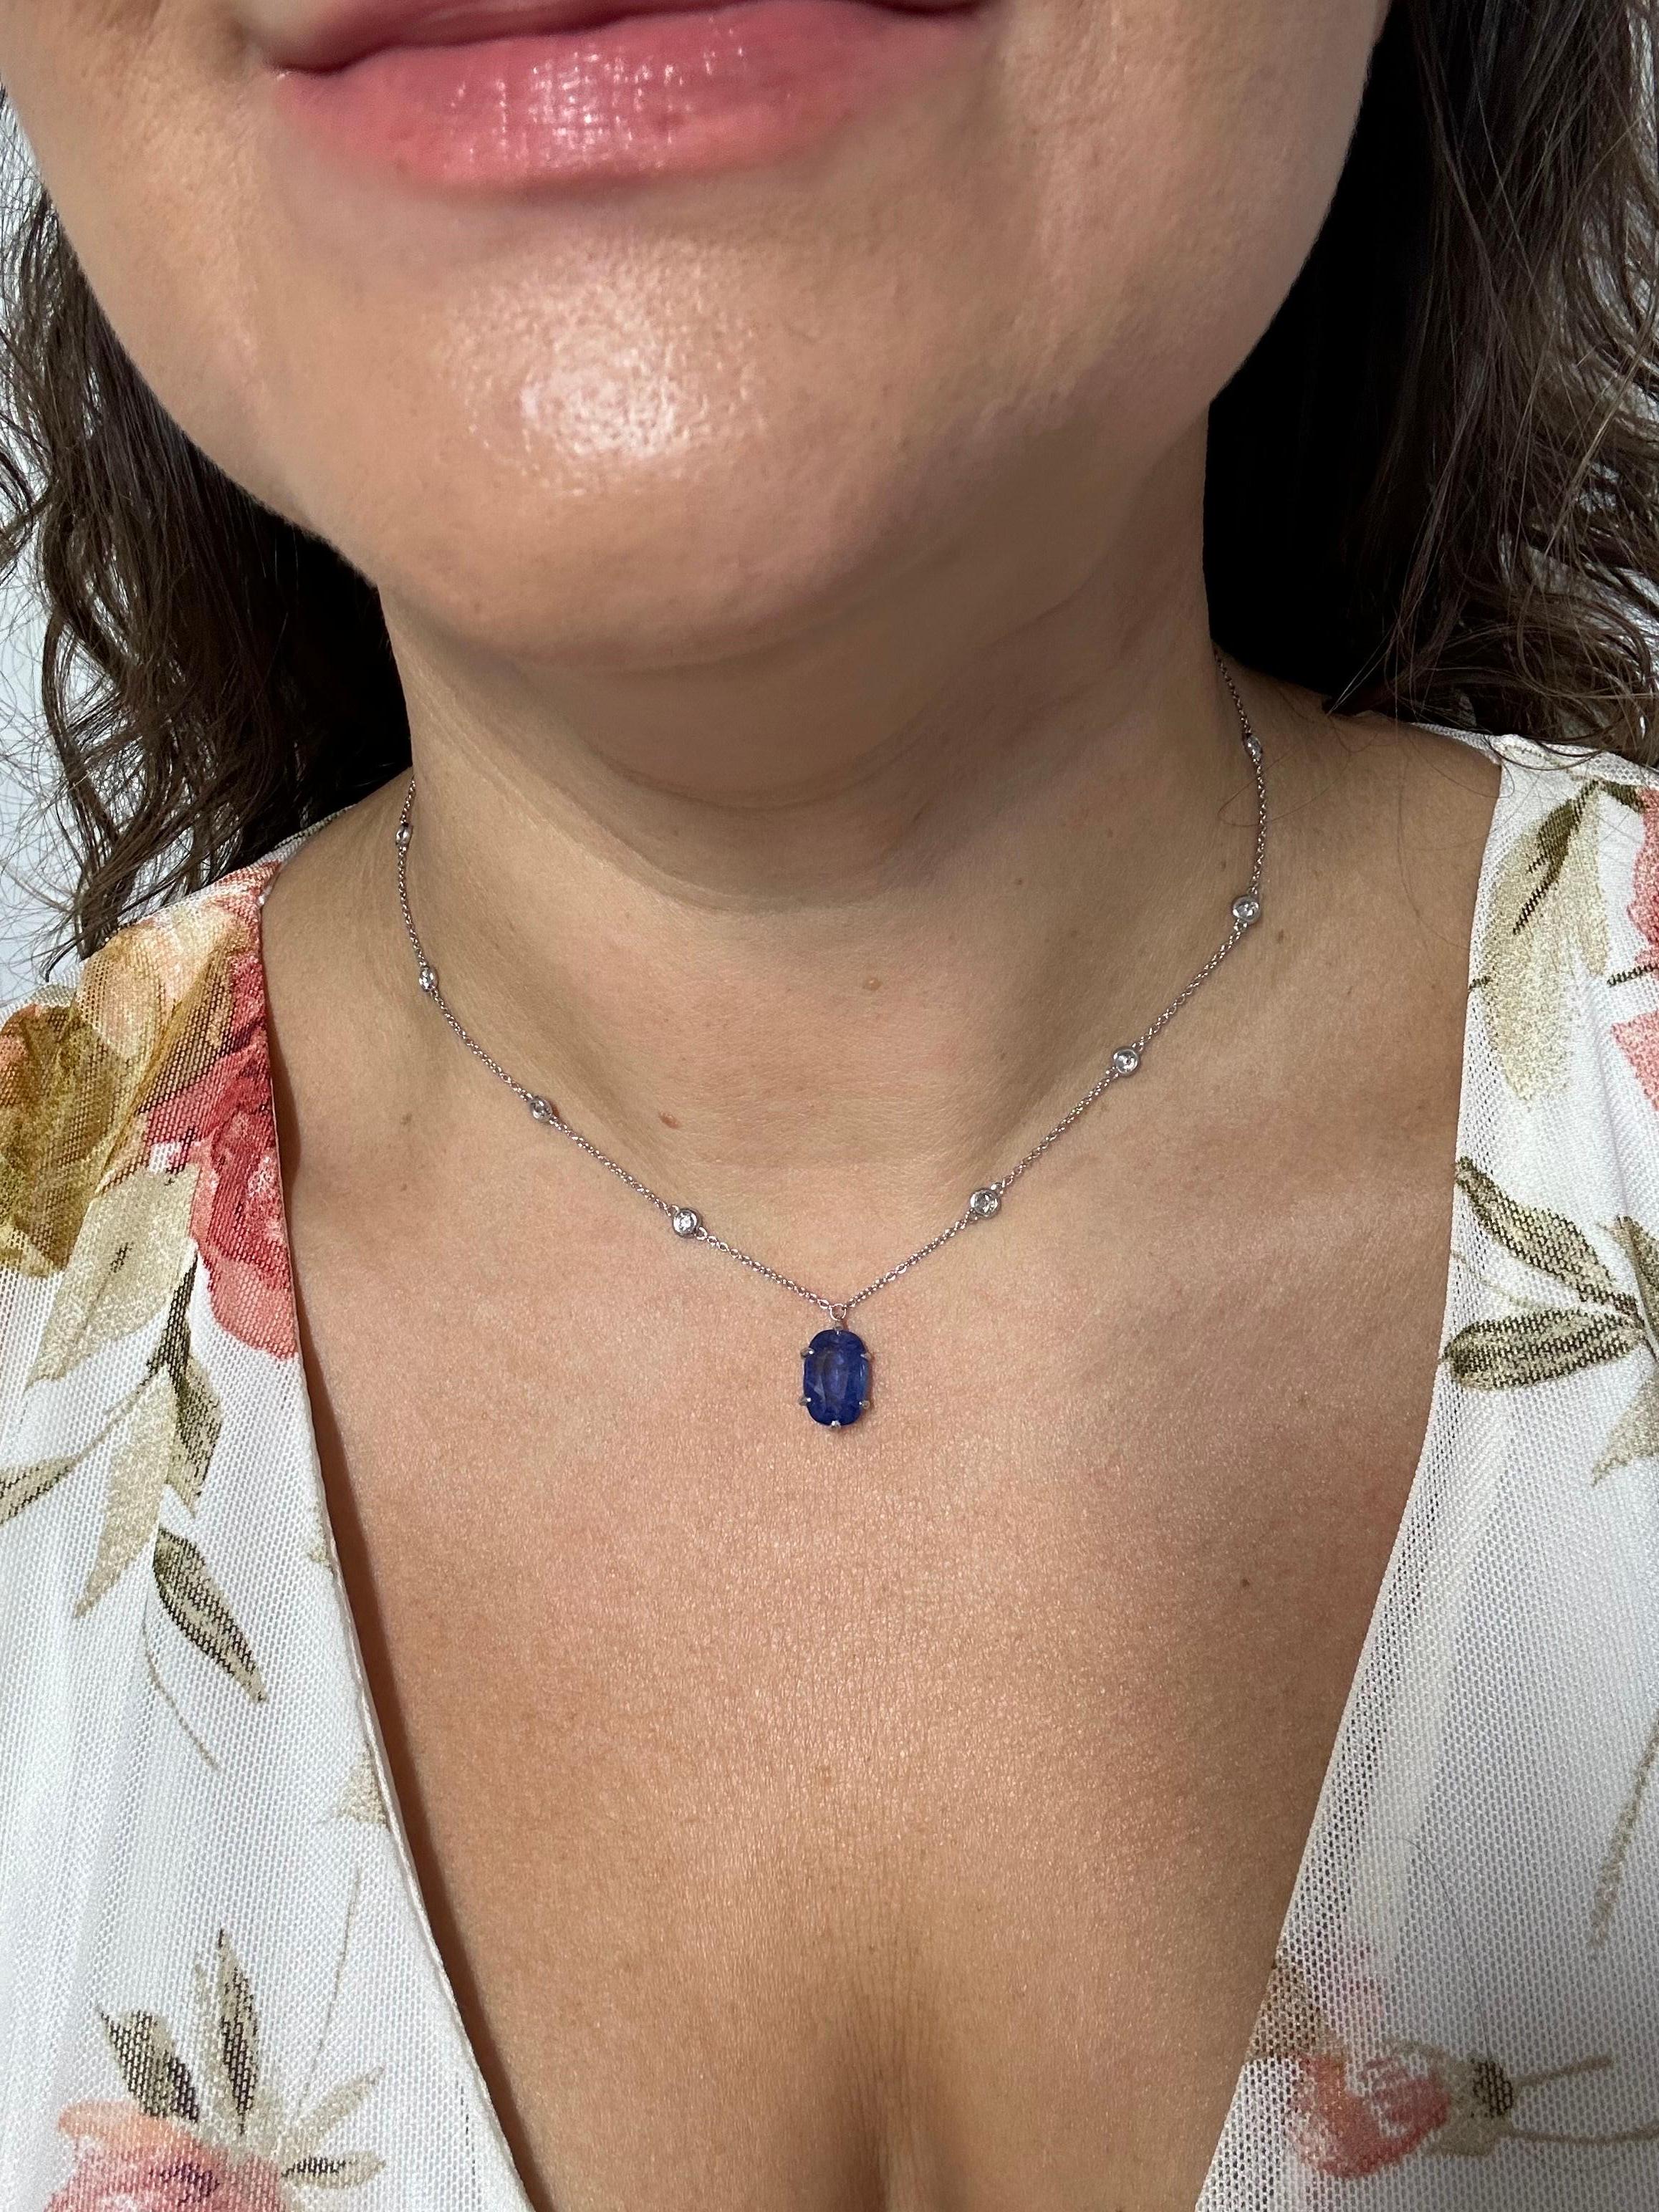 Rare Large Sapphire Diamond Pendant Necklace by the Yard 14kt 5.14ct Sapphire For Sale 1